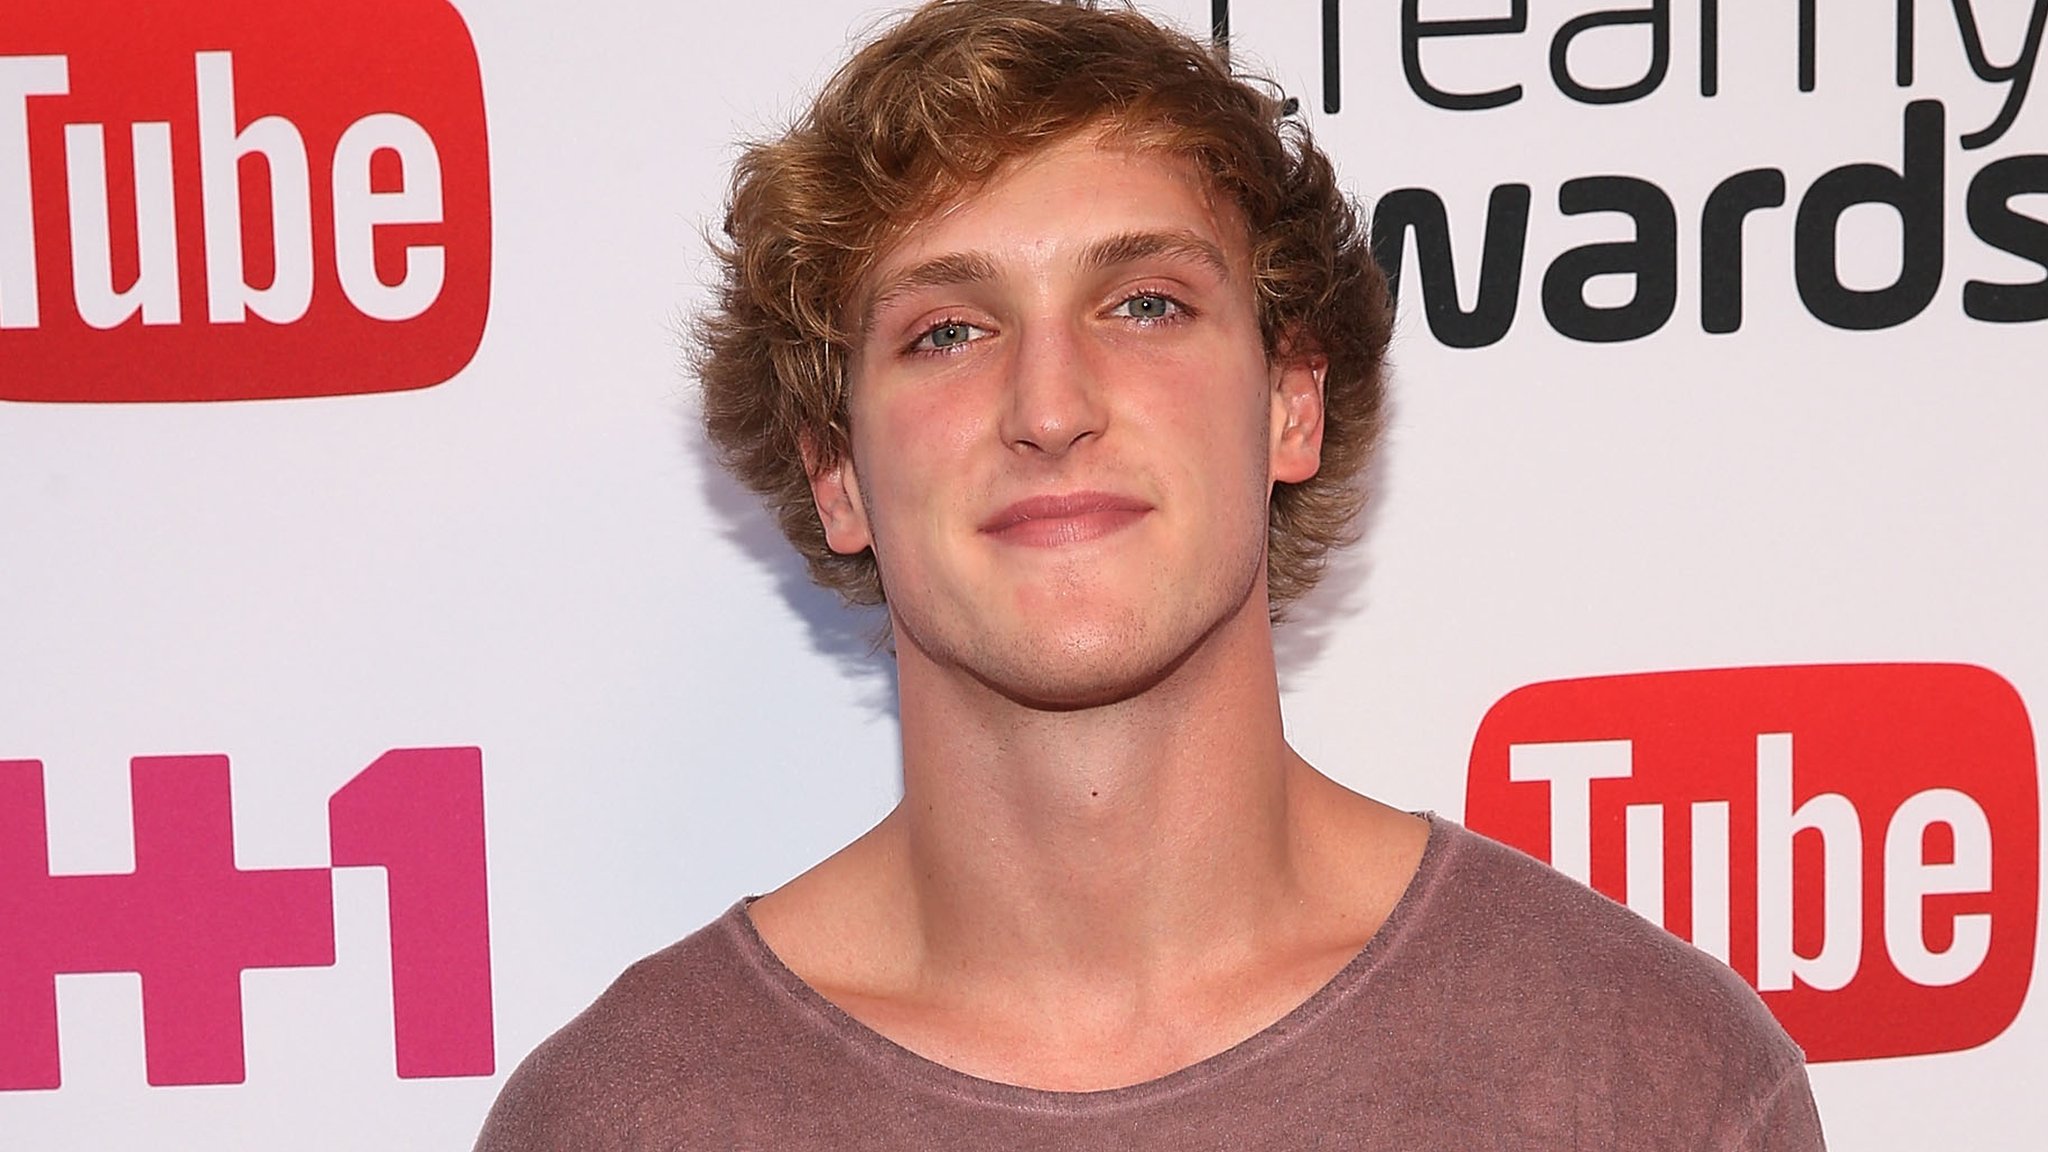 Controversial Youtube Star Logan Paul announces he will go gay for a month  [Watch] - IBTimes India